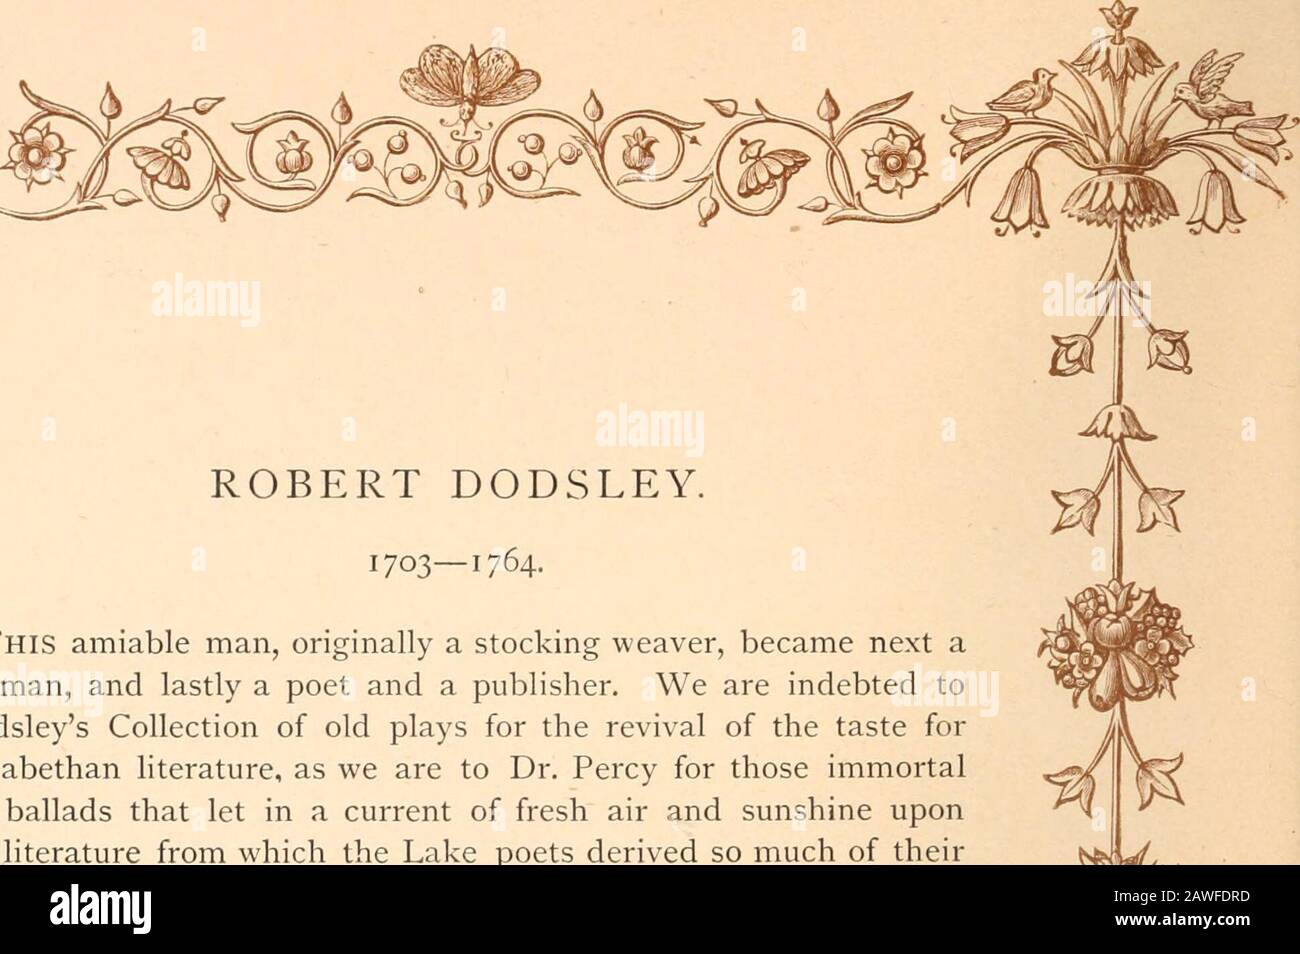 Two centuries of song : or, Lyrics, madrigals, sonnets, and other occasional verses of the English poets of the last two hundred years . K. ROBERT DODSLEY. 1703—1764. This amiable man, originally a stocking weaver, became next afootman, and lastly a poet and a publisher. We are indebted toDodsleys Collection of old plays for the revival of the taste forElizabethan literature, as we are to Dr. Percy for those immortalold ballads that let in a current of fresh air and sunshine uponour literature from which the Lake poets derived so much of theirvitality. THE PARTING KISS. r0&gt;. One kind wish Stock Photo